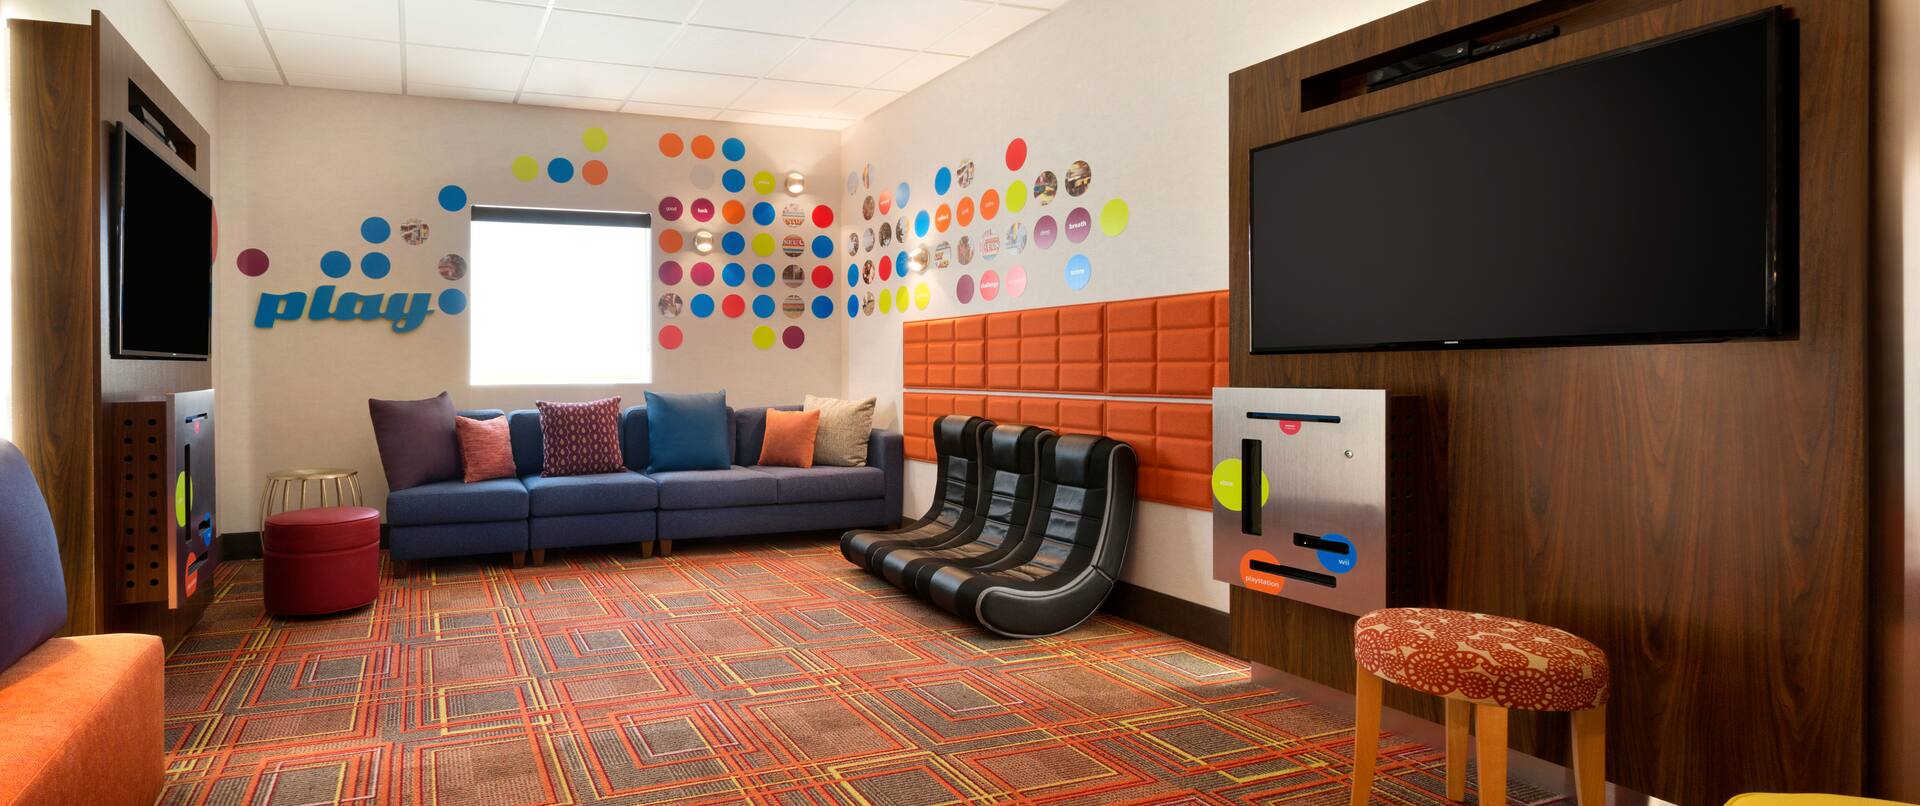 Game Room With Window, Two TVs, Colorful Seating, and Three Gaming Rockers